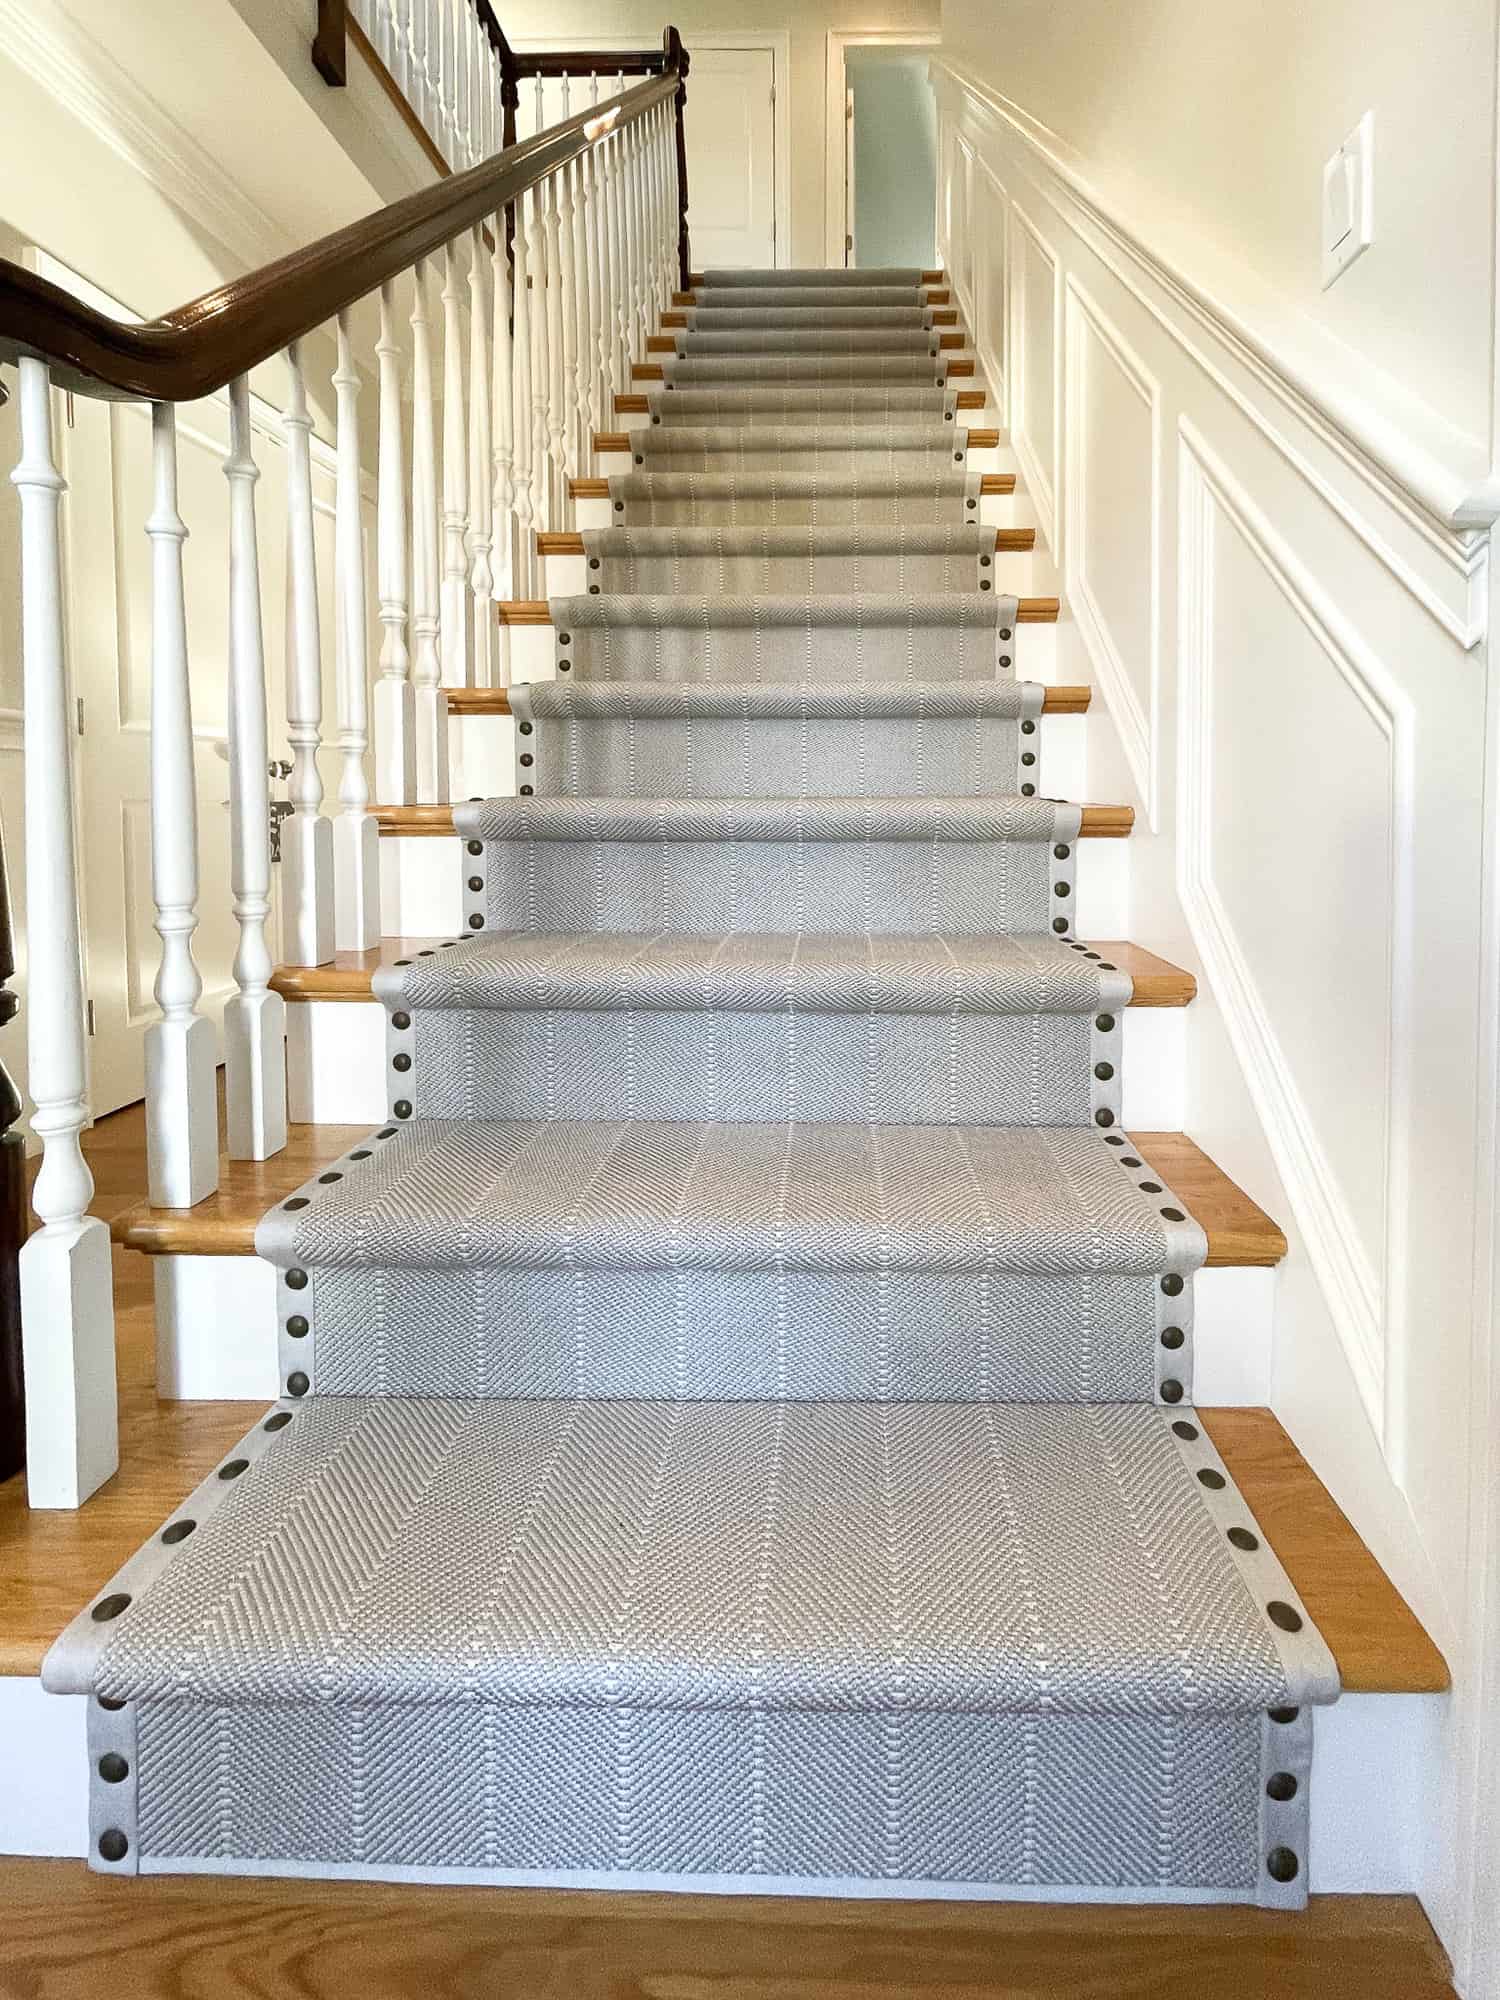 This is a grey with white stripe carpet hollywood cheveron style stair runner with grey wide binding with details ensures that the carpet contours the stairs from top to bottom.